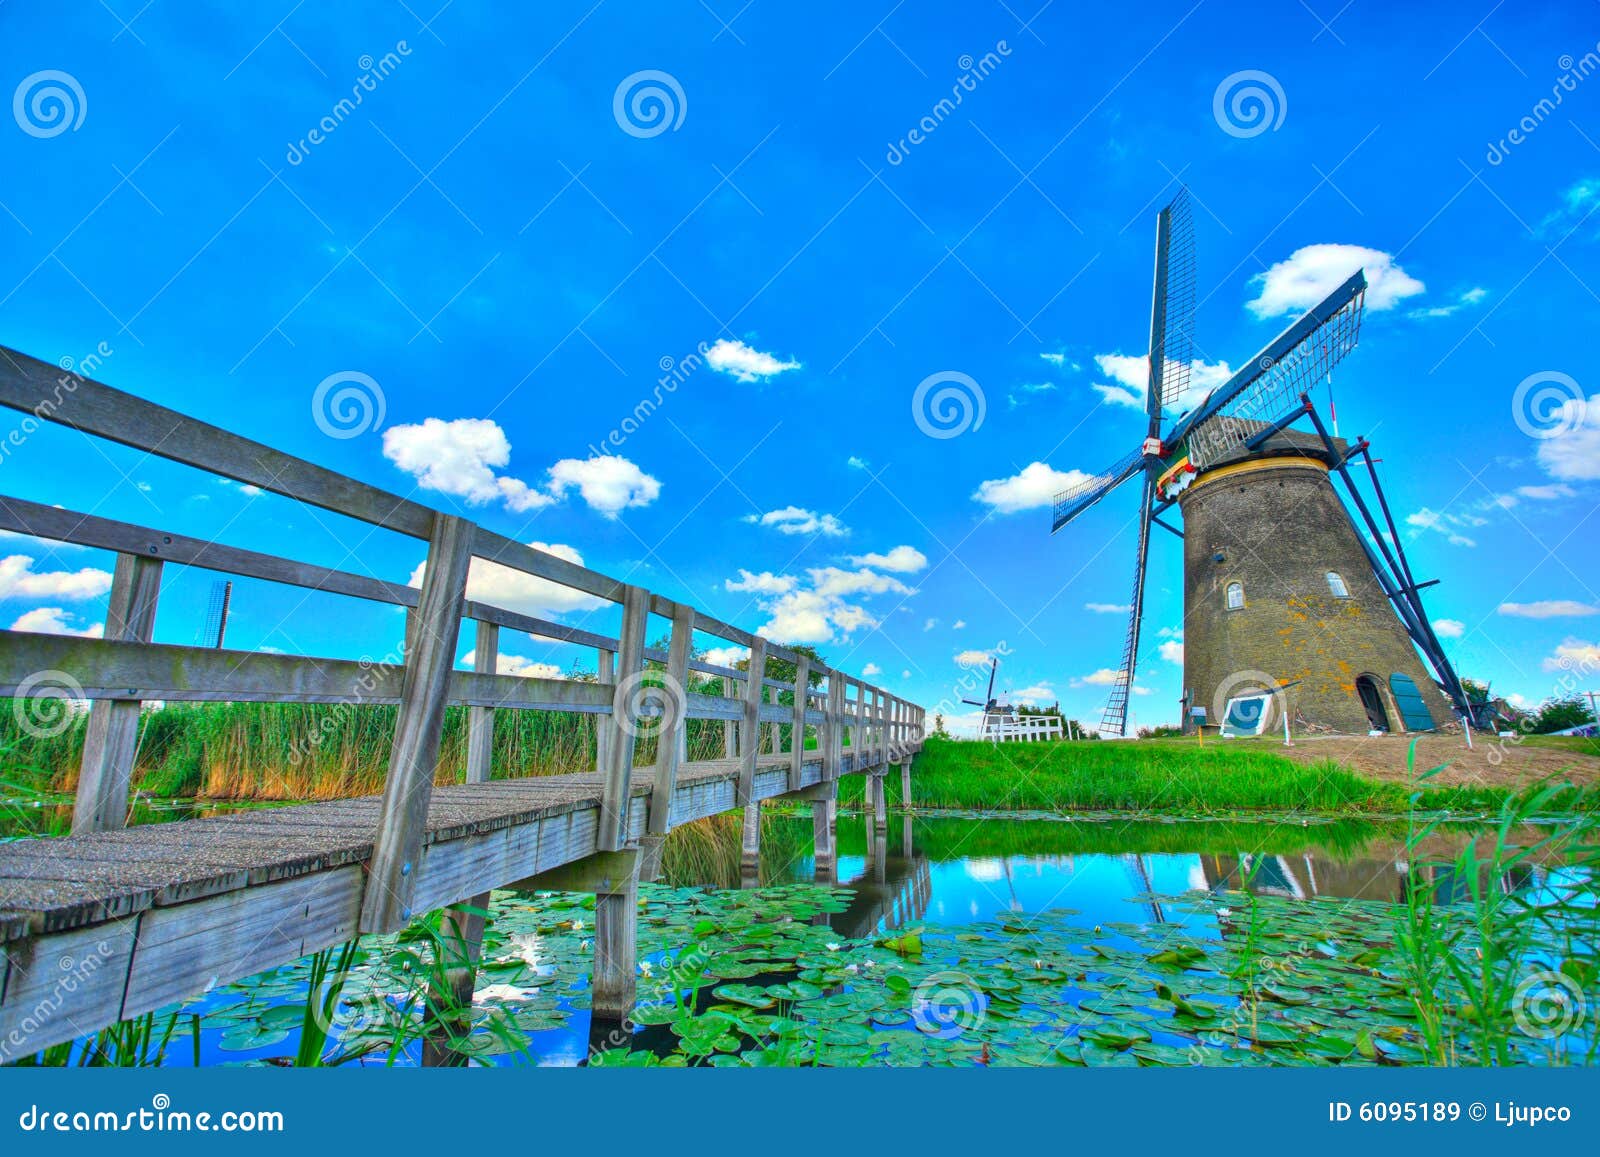 Windmill In Kinderdijk, Holland Royalty Free Stock Images - Image 